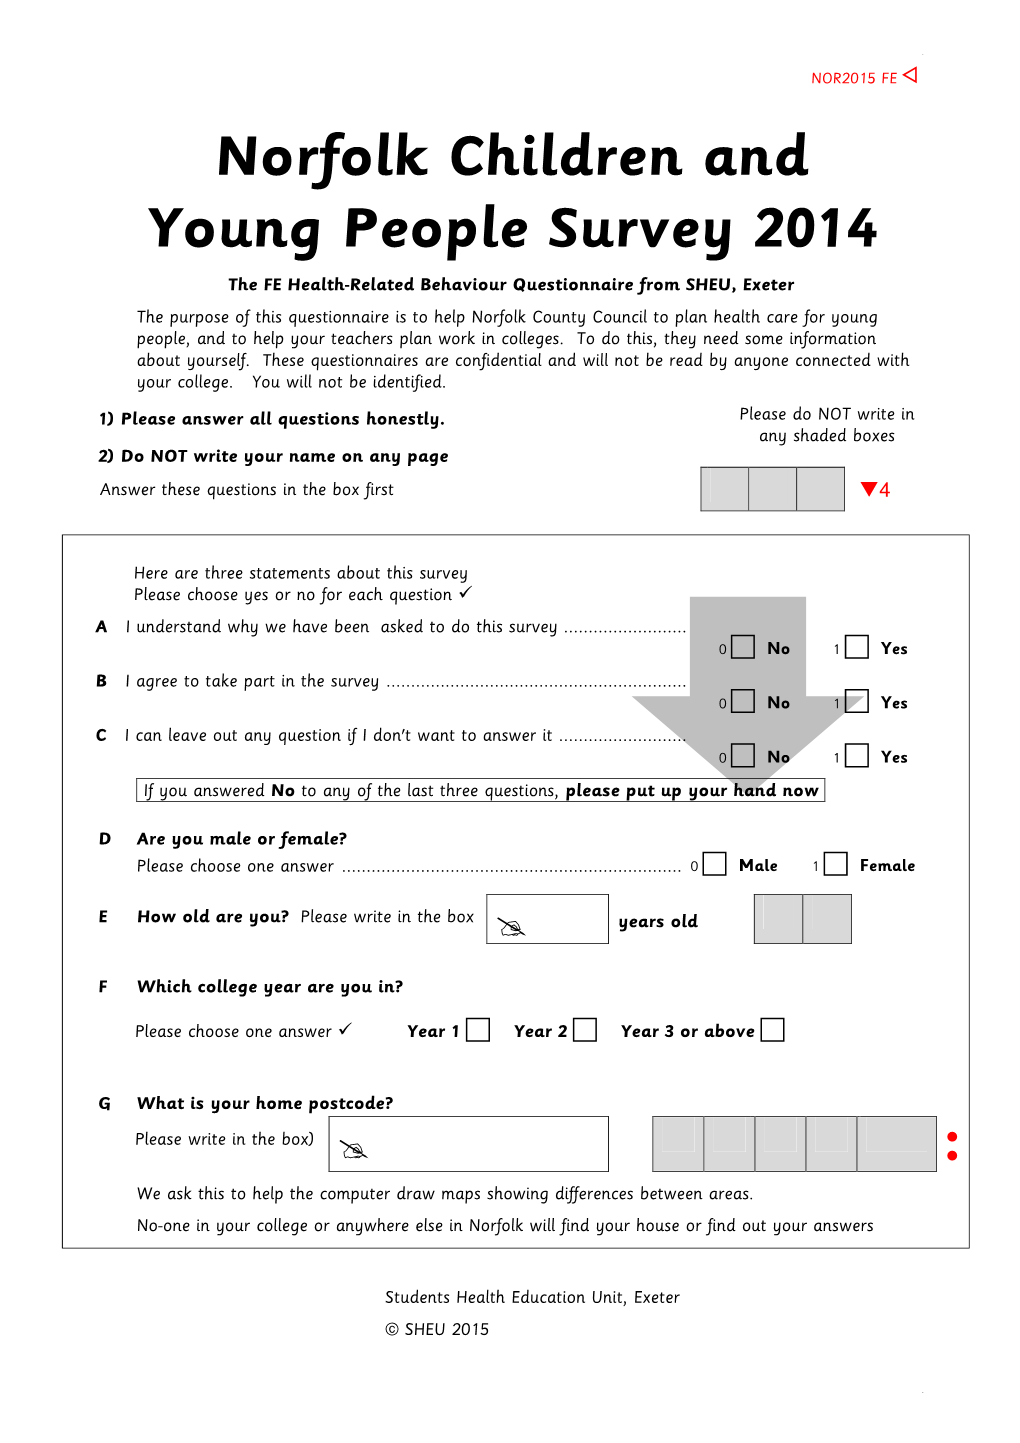 Norfolk Children and Young People Survey 2014